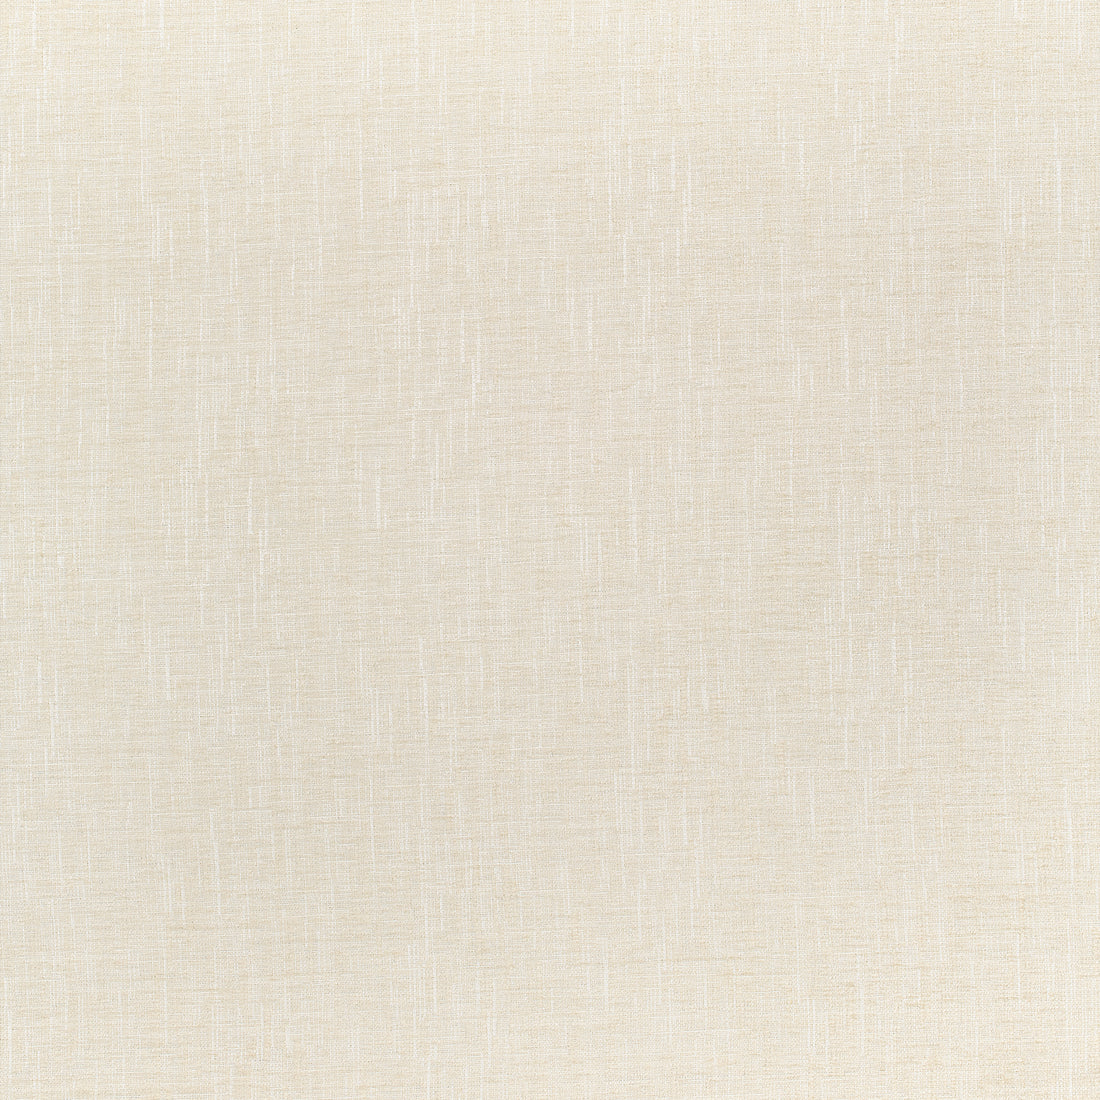 Montage fabric in ivory color - pattern number W80477 - by Thibaut in the Mosaic collection